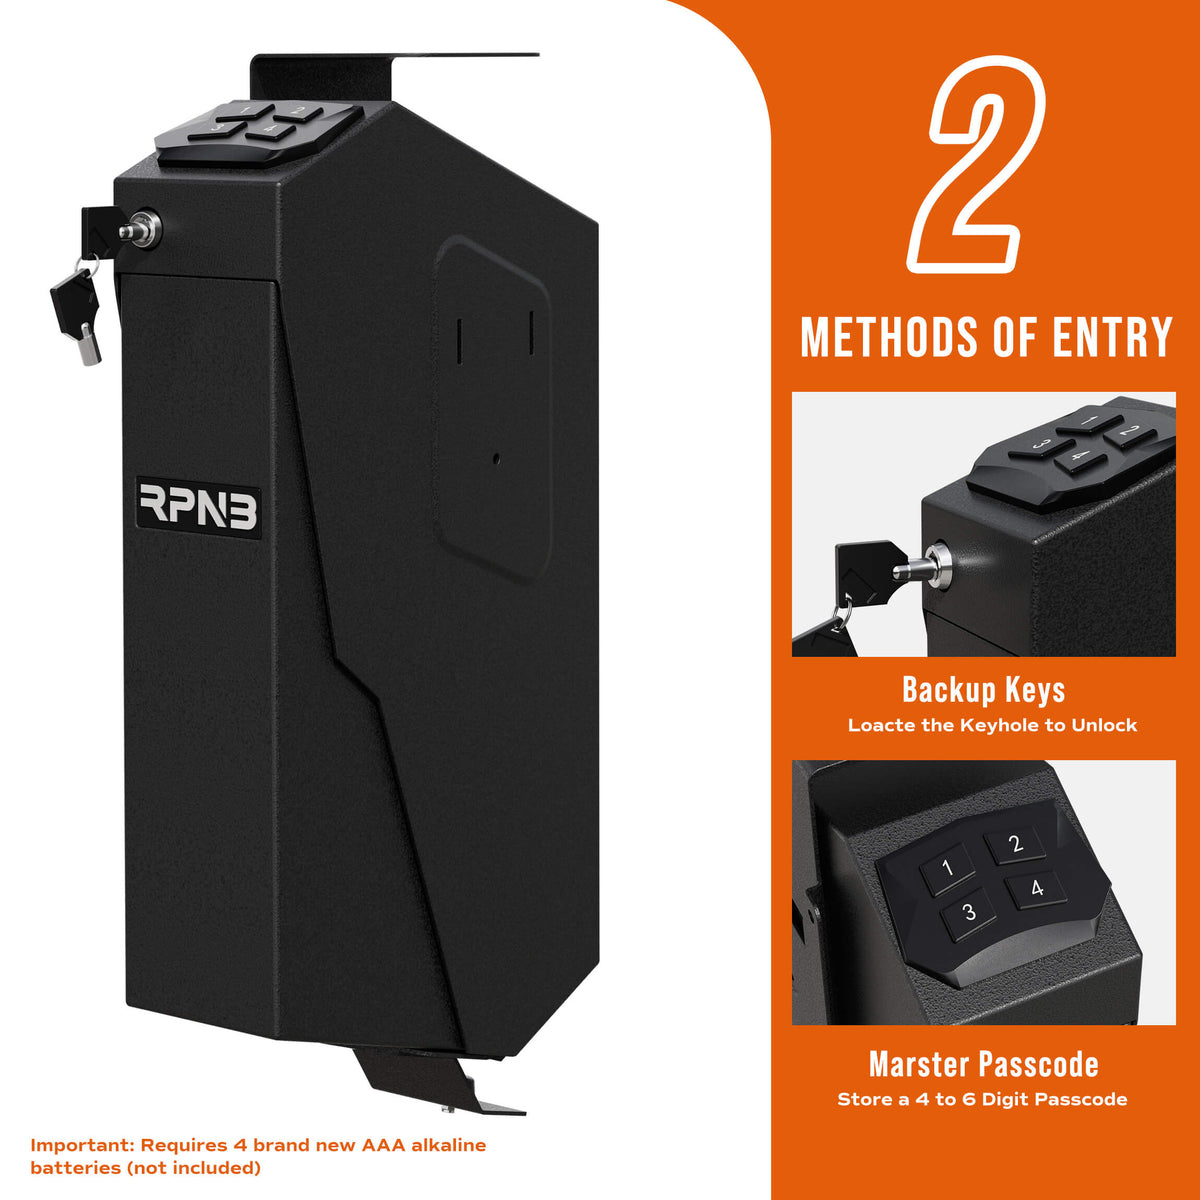 RPNB RP311E Digital Keypad Handgun Safe with Quick Access Drop Down Lid Two Methods of Entry